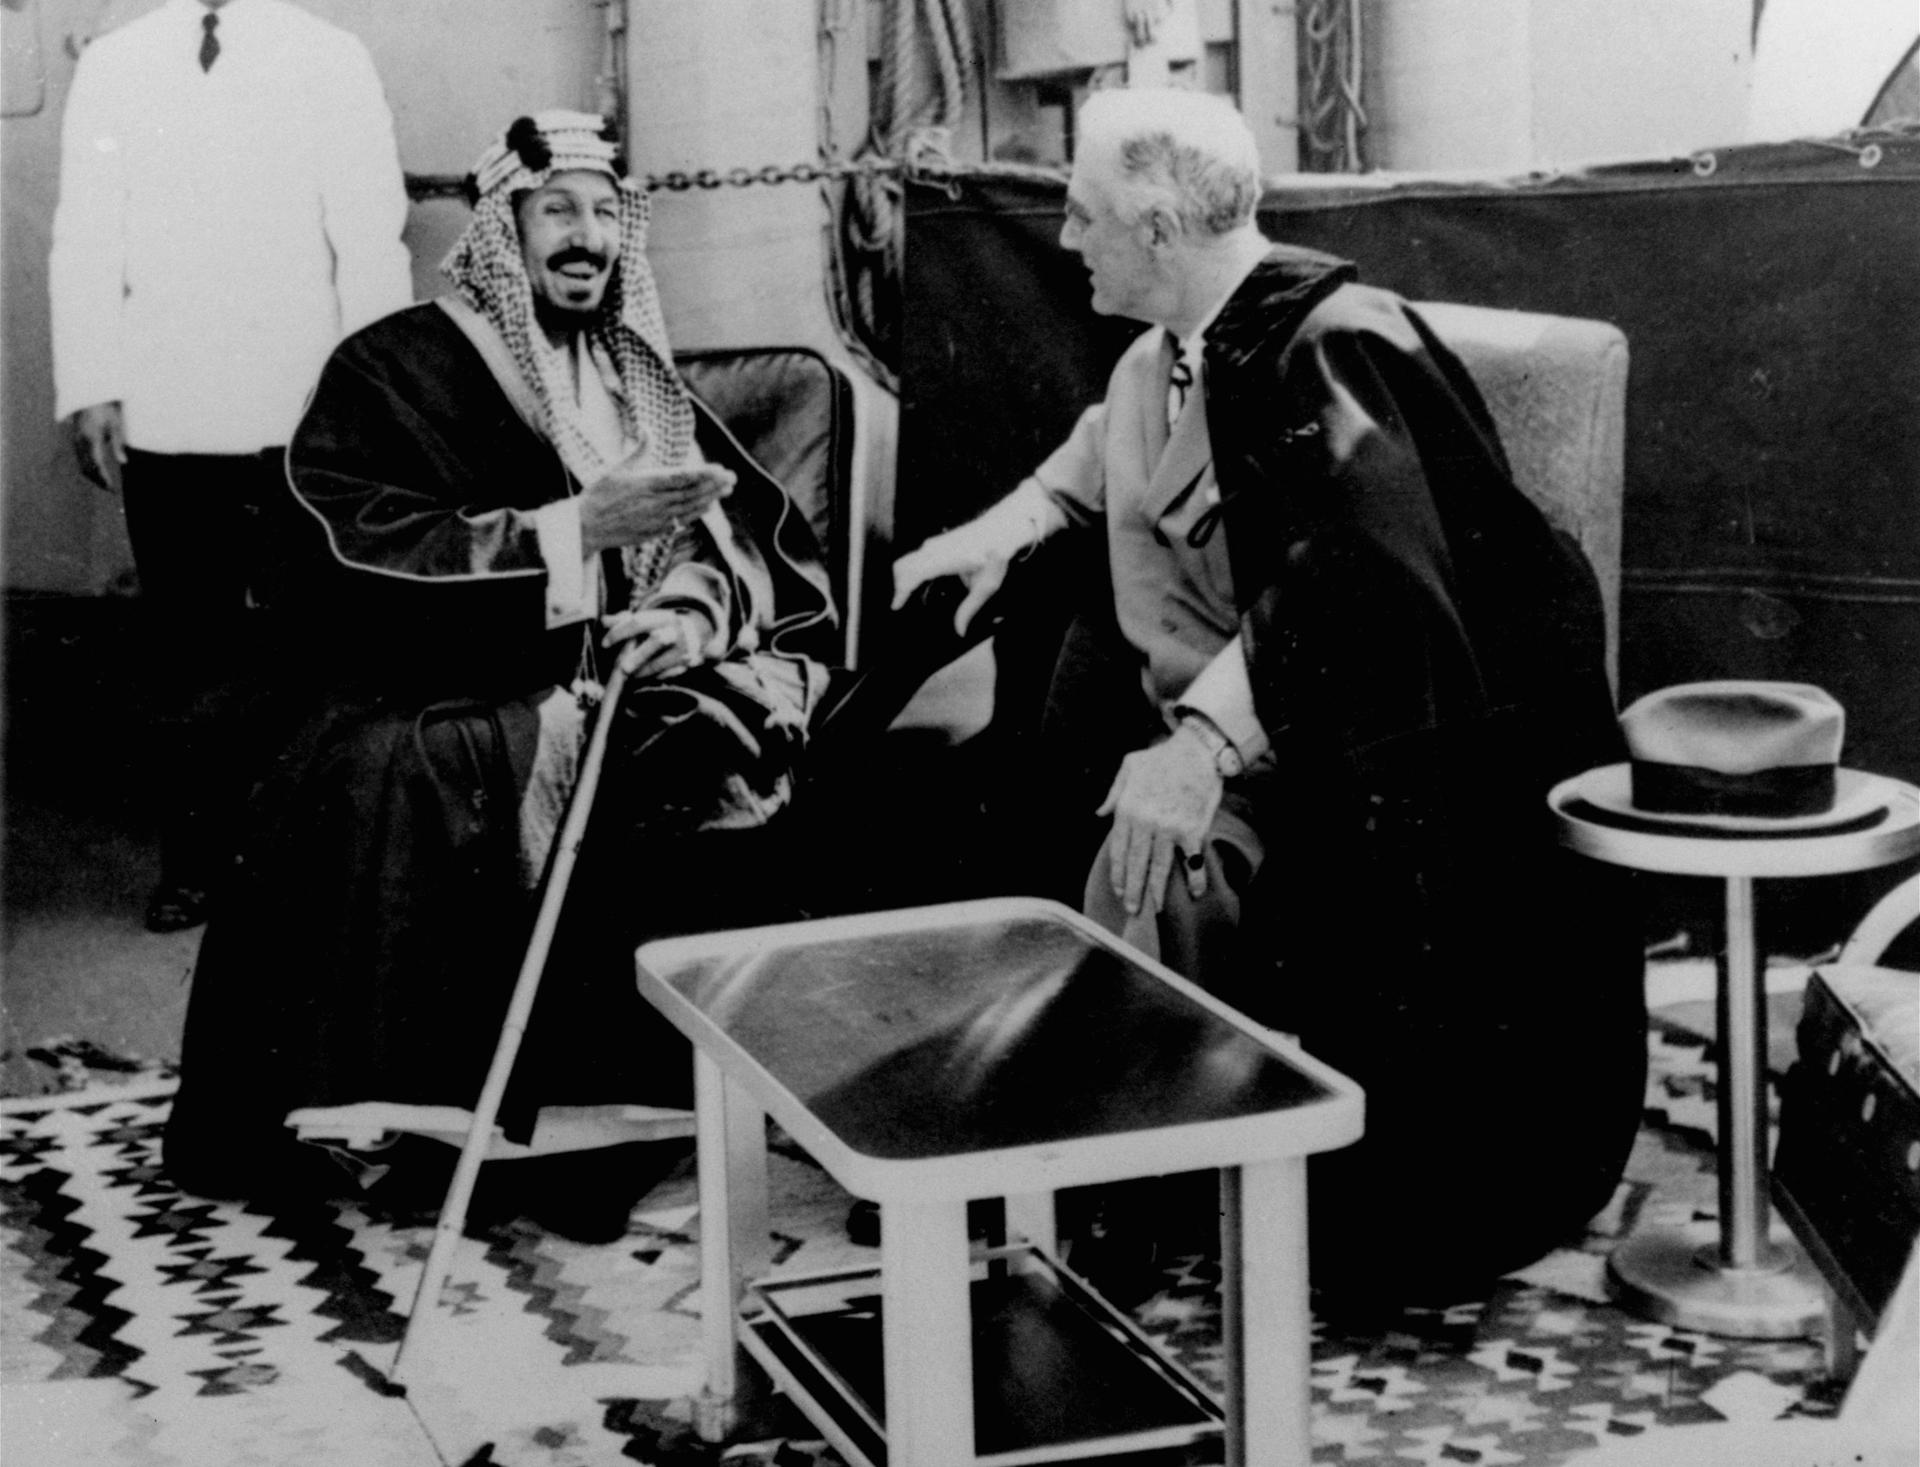 US President Franklin D. Roosevelt and Saudi King Abdulaziz Ibn Saud discuss Saudi-US relations aboard the USS Quincy in the Great Bitter Lake north of the city of Suez, Egypt, Feb. 14, 1945.